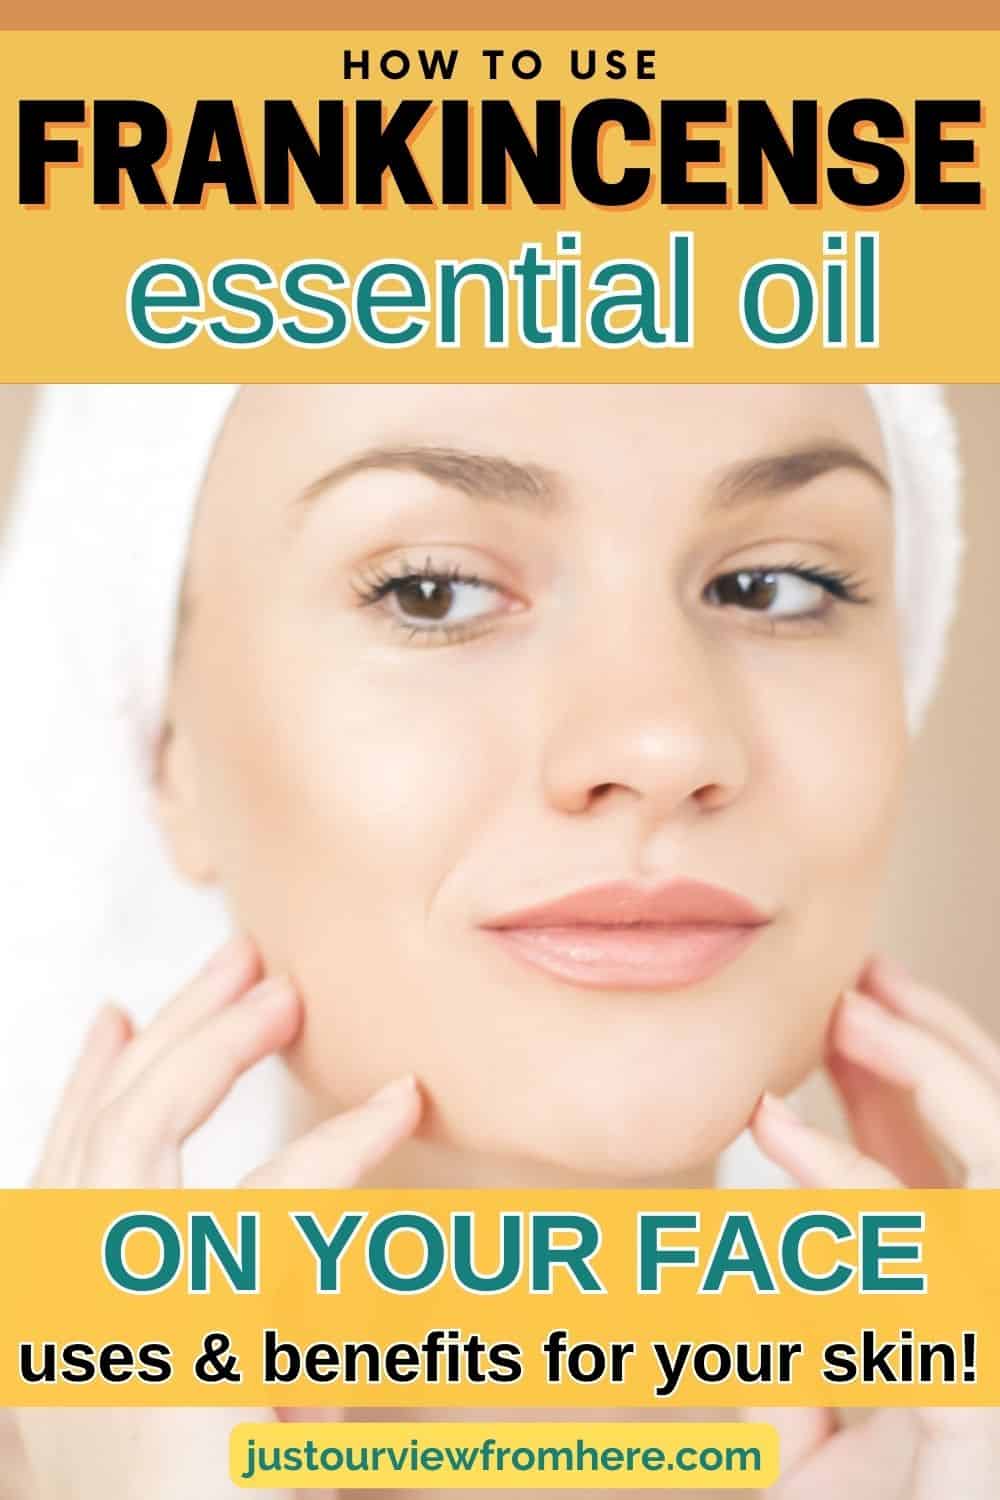 young woman's face with beautiful complexion, text overlay how to use frankincense essential oil on your face, uses and benfits for your skin